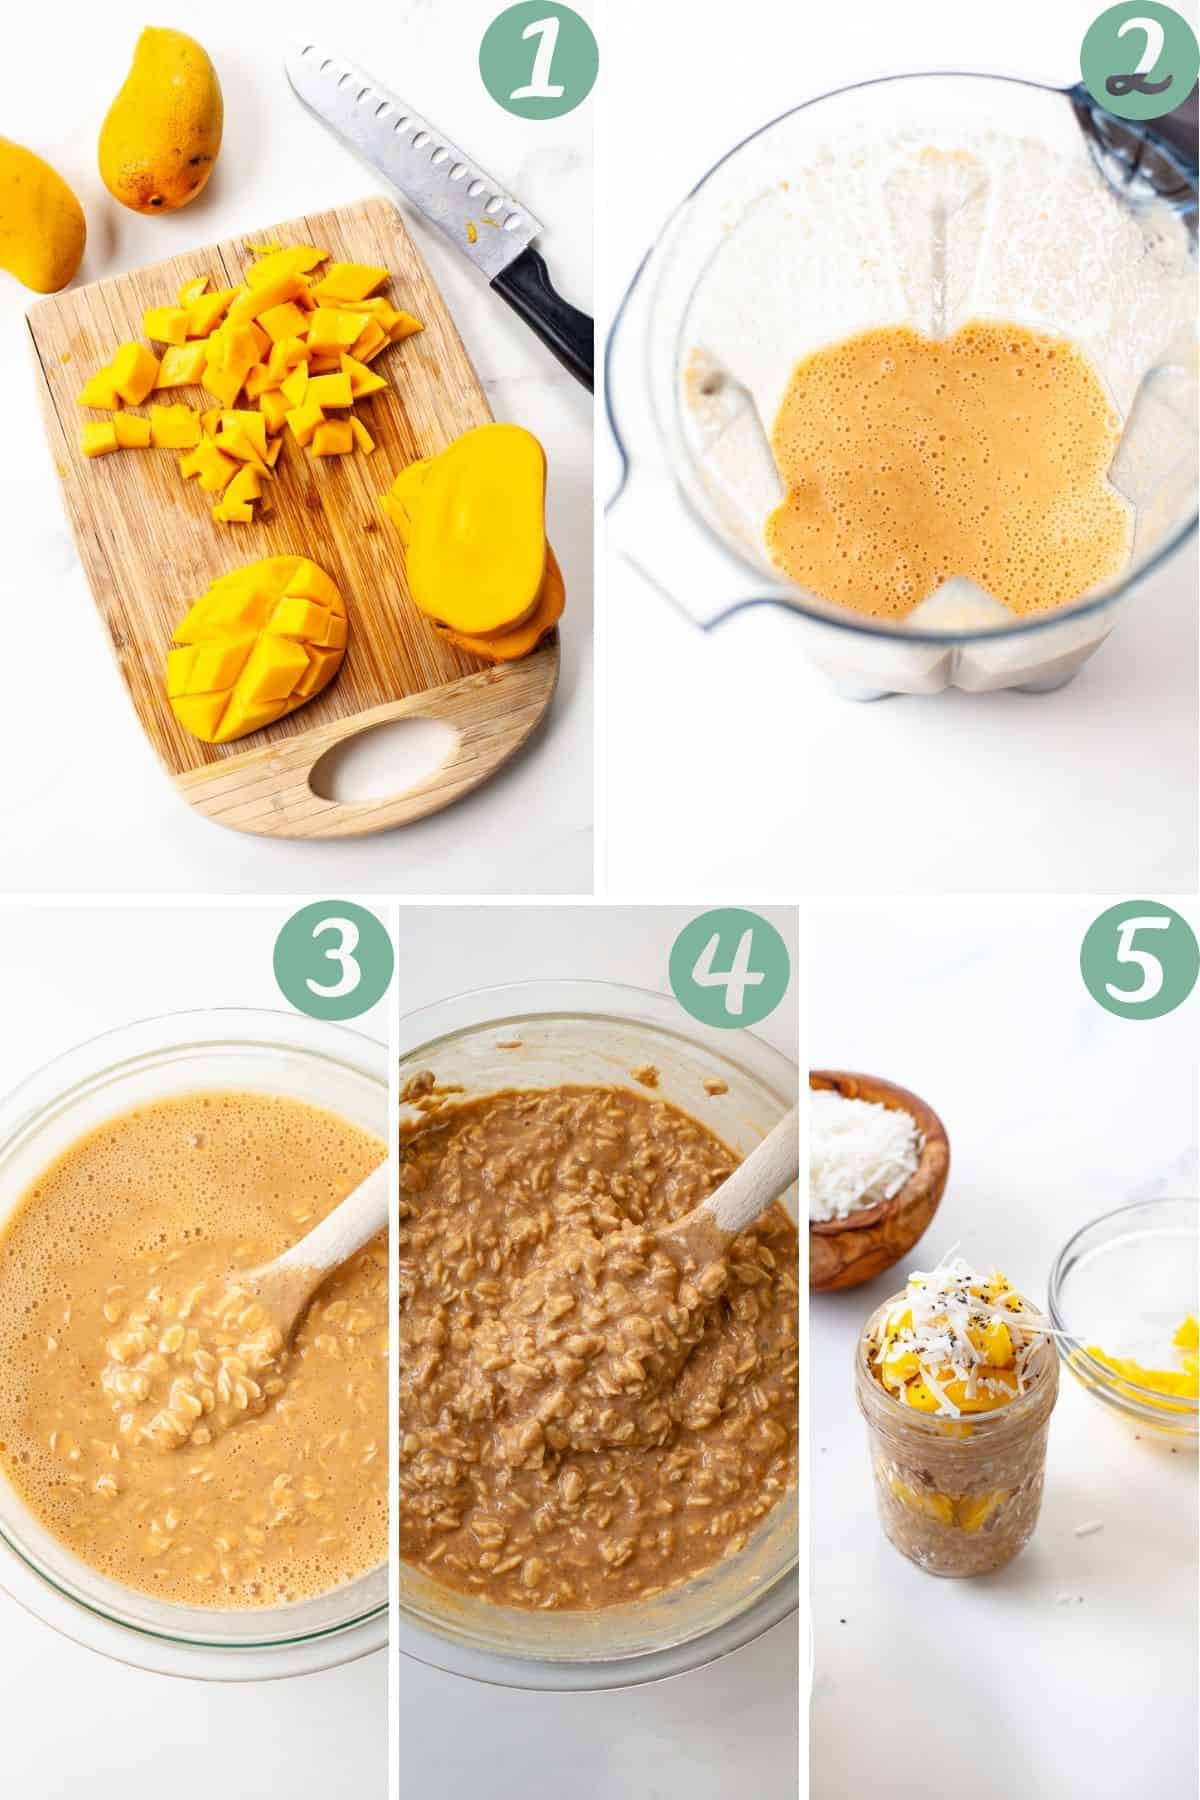 sliced mango. ingredients blended. oats added. oats chilled overnight. mason jar of oats with toppings. 